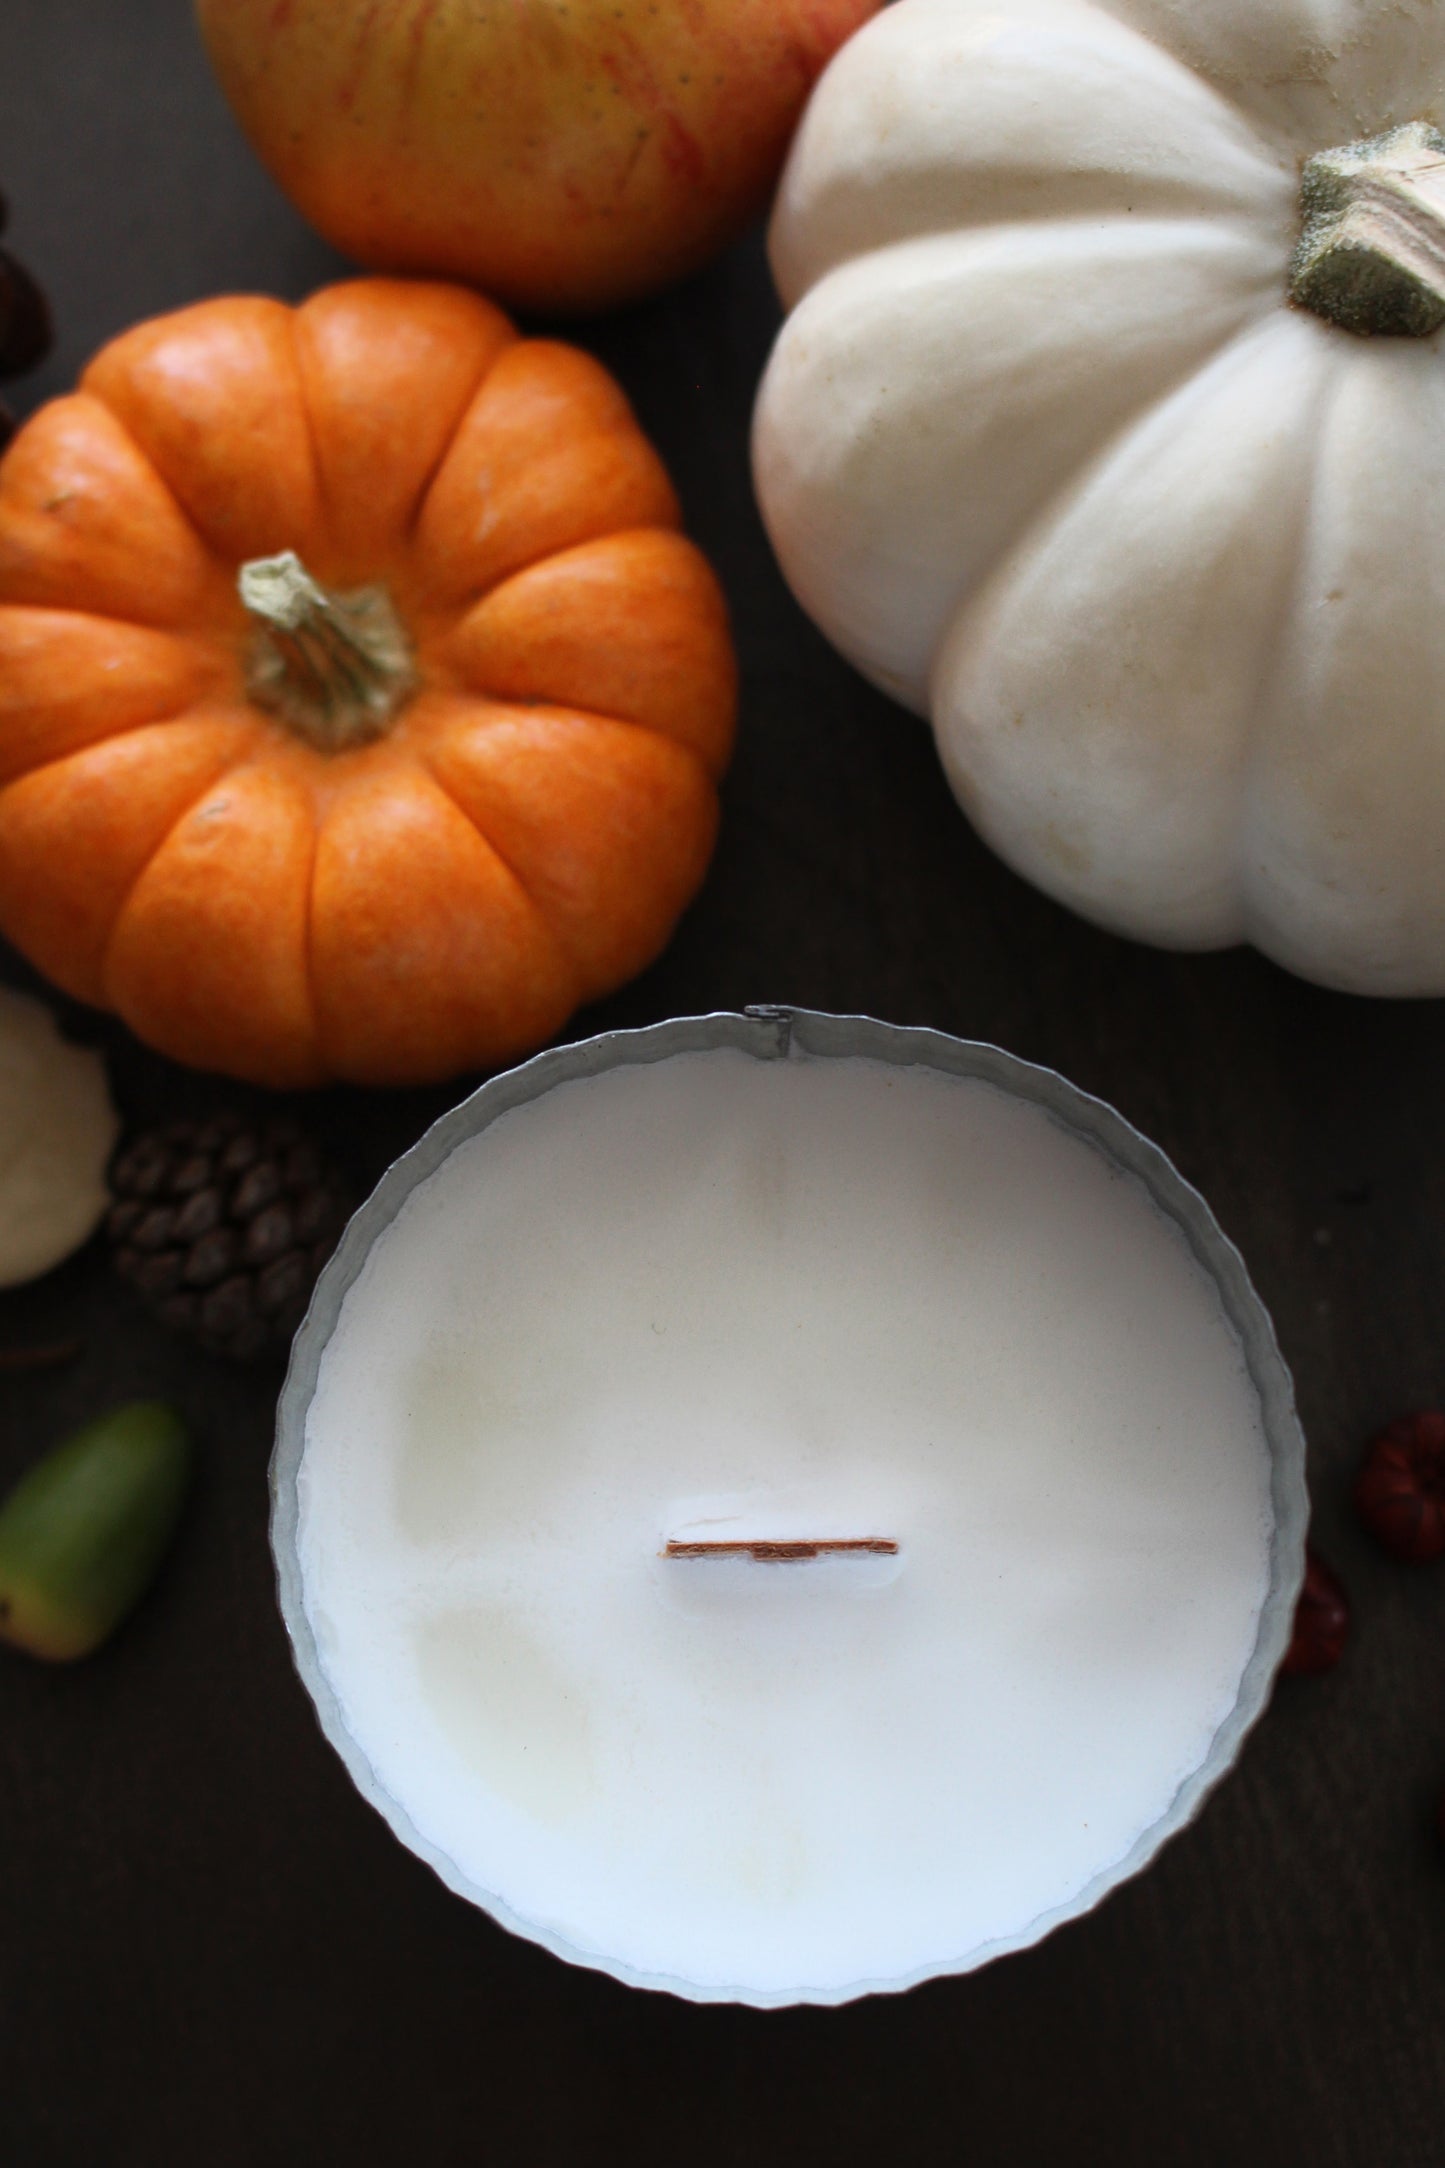 Fall Harvest Candle